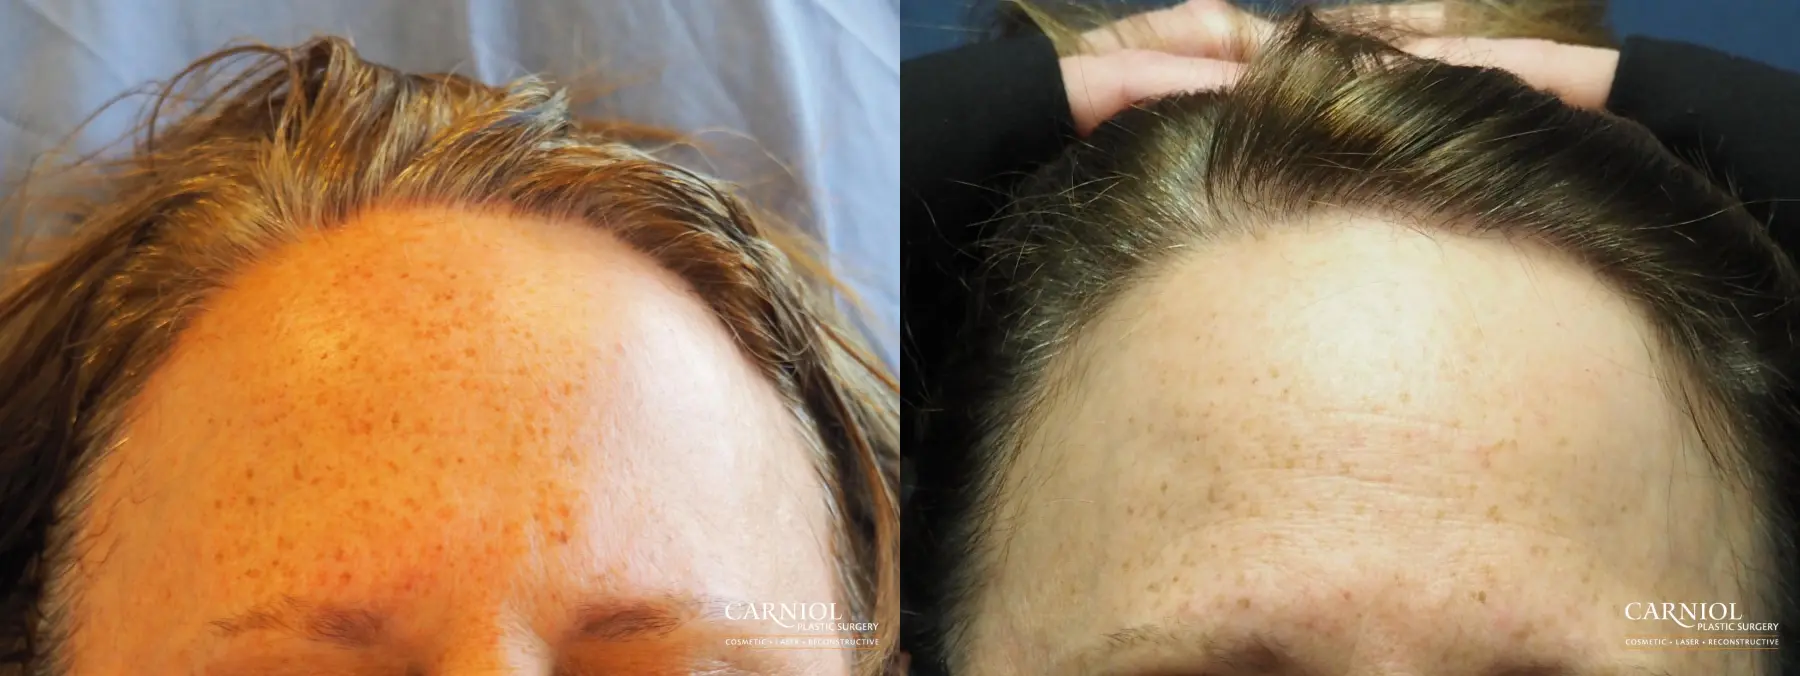 Nonsurgical Hair Restoration: Patient 1 - Before and After  